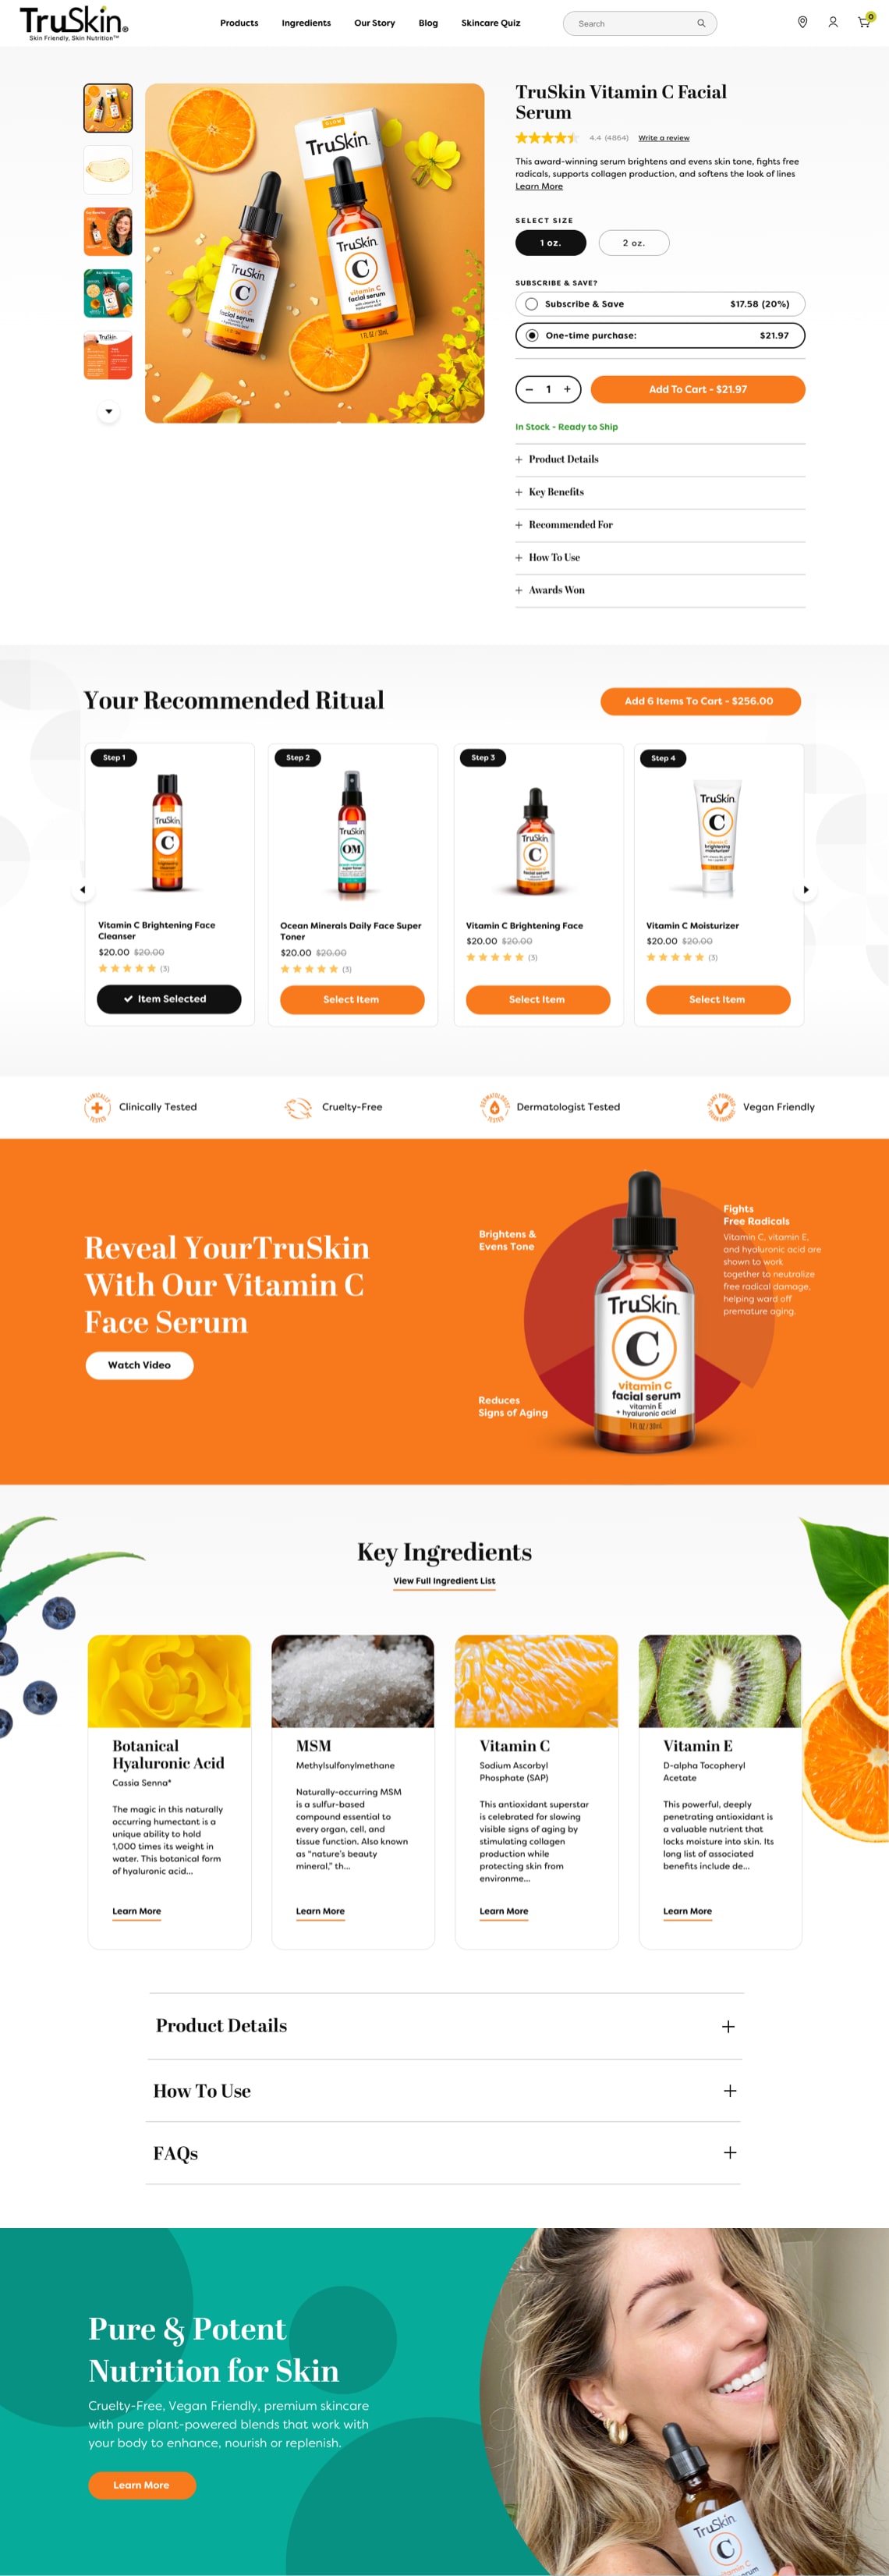 TruSkin - Product Detail Page